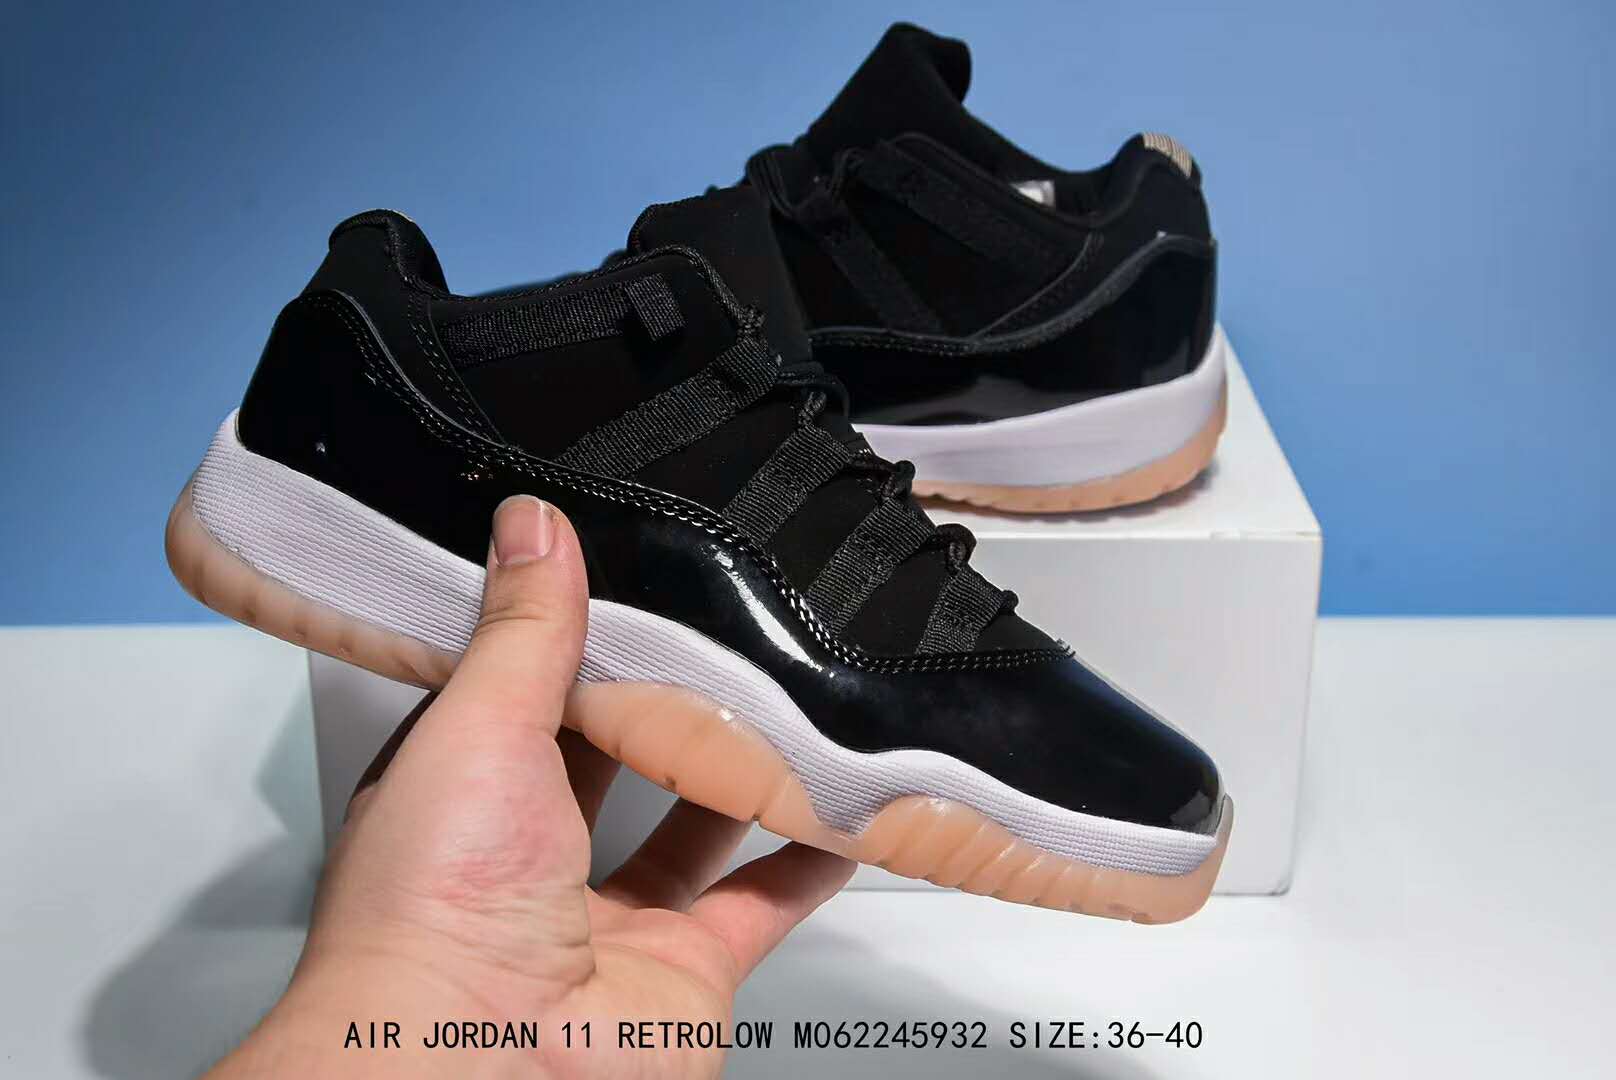 New Jordans 11 Low Suede Black Brown Sole Basketball Shoes